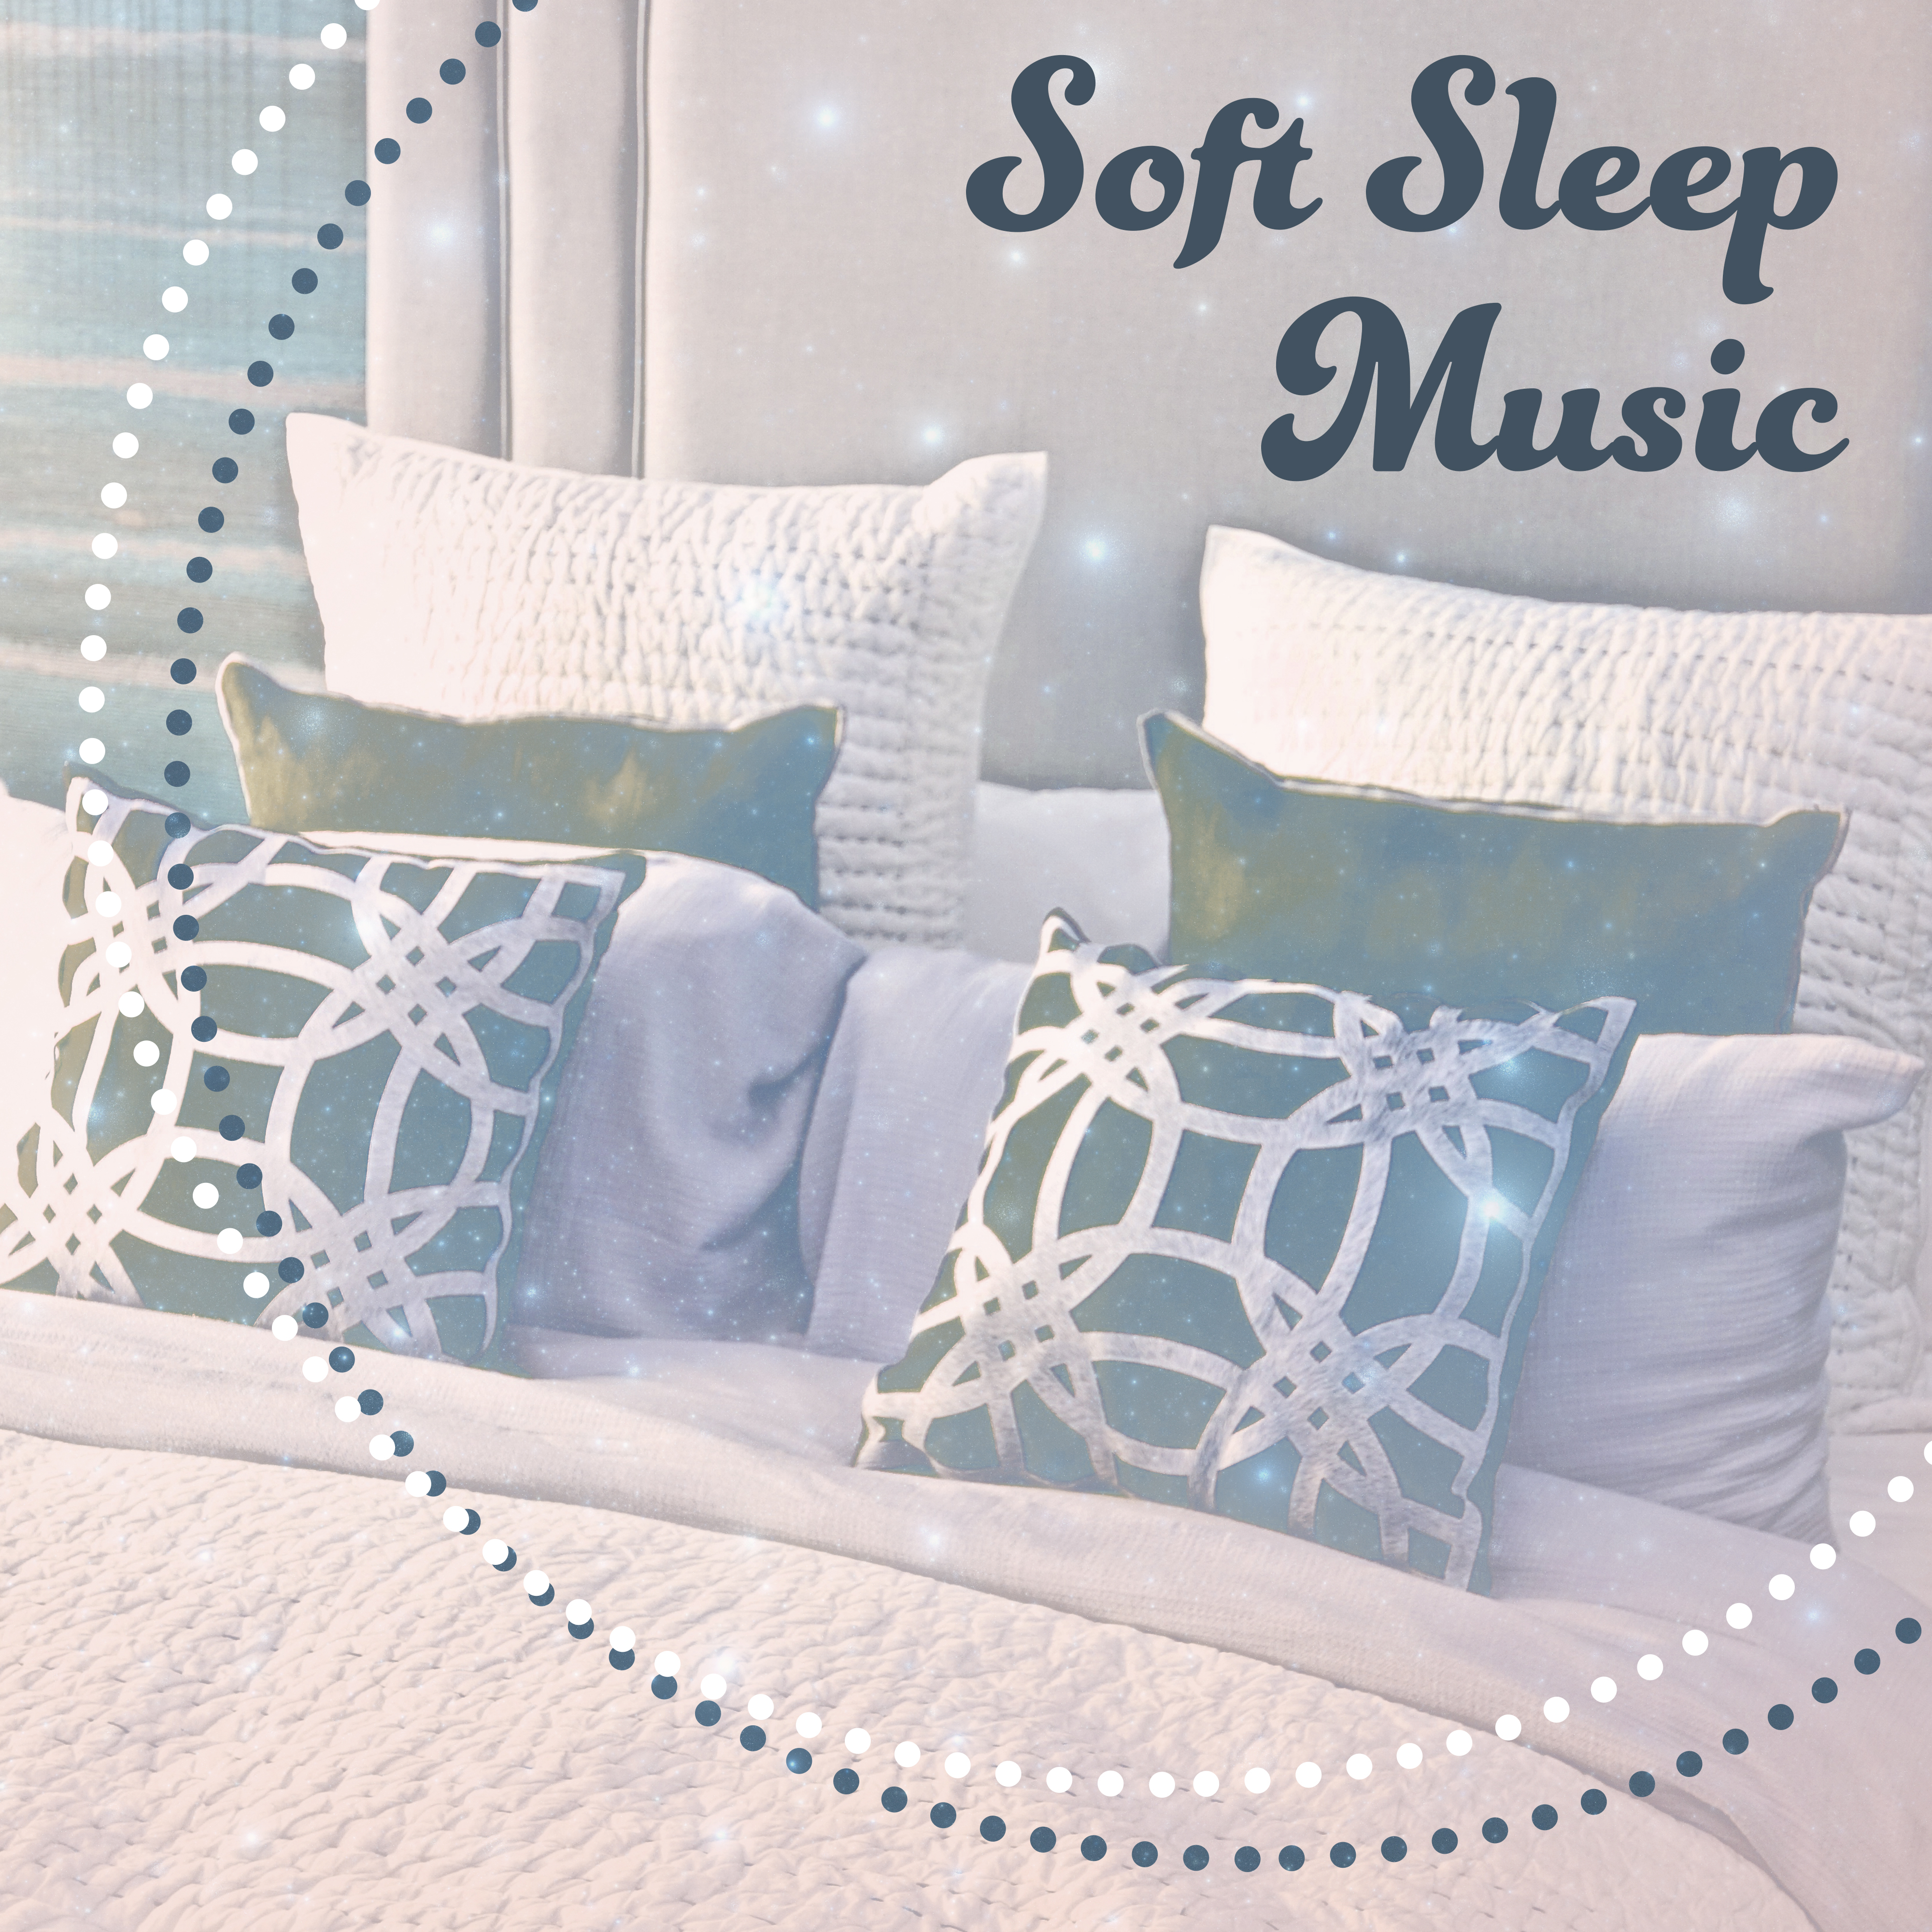 Soft Sleep Music – Relaxing Sound Therapy, Peaceful Music at Goodnight, Healing Lullabies, Sweet Dream